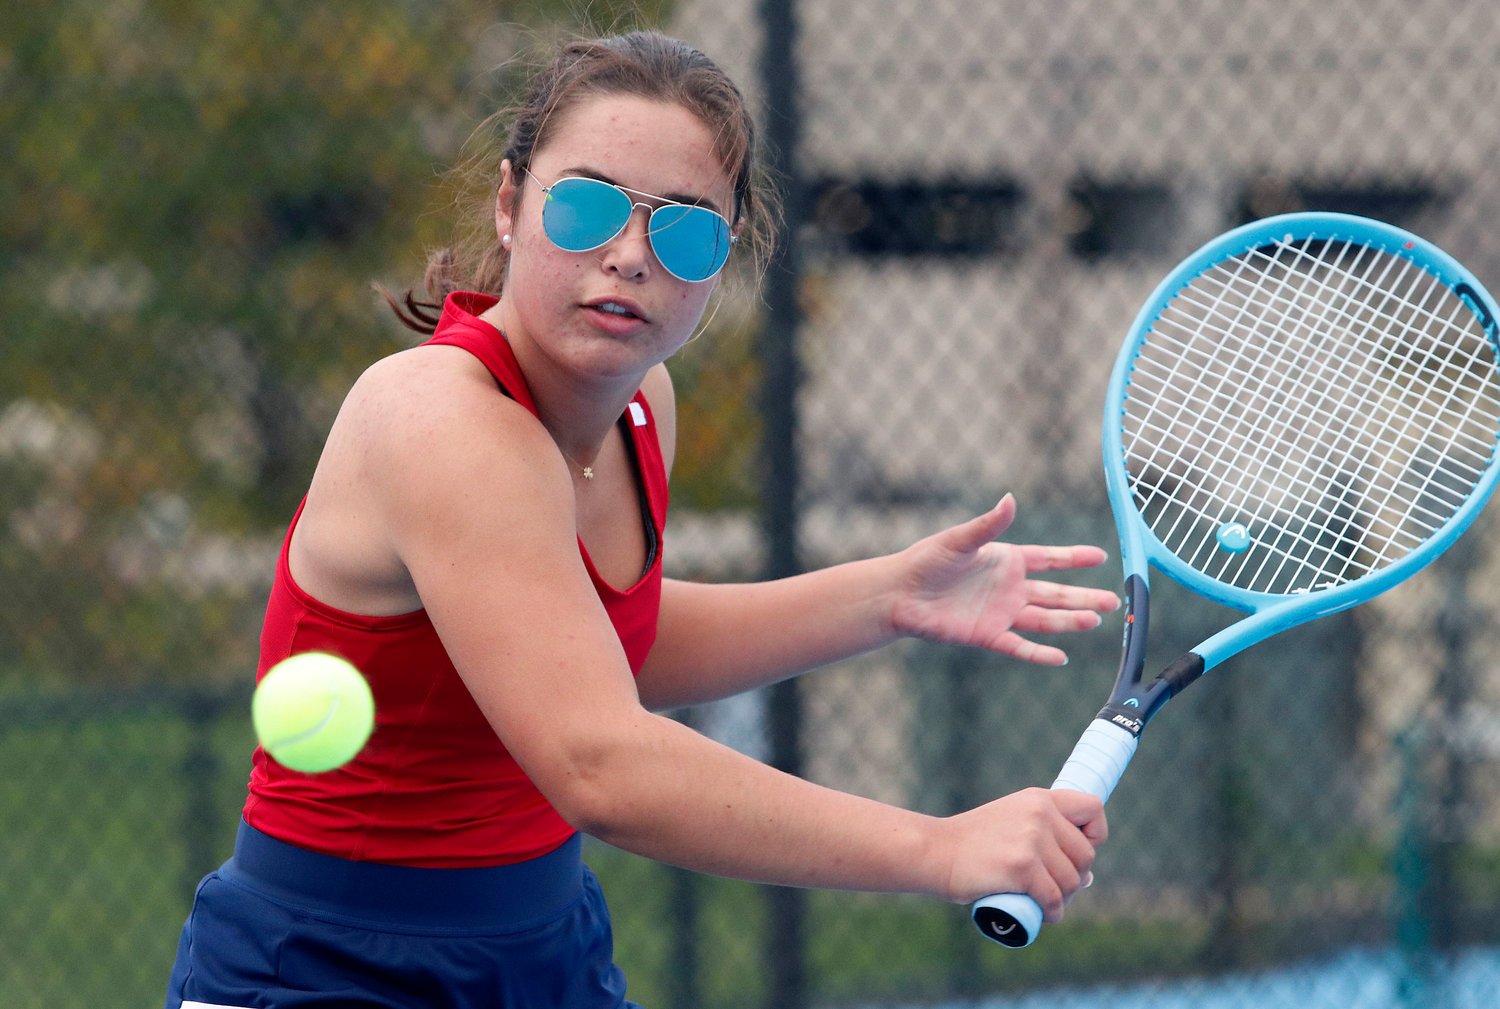 Portsmouth High’s Talus Nightingale strokes a backhand during her No. 1 singles match against Elsa White of Mt. Hope. Nightingale won, 6-4, 6-4.